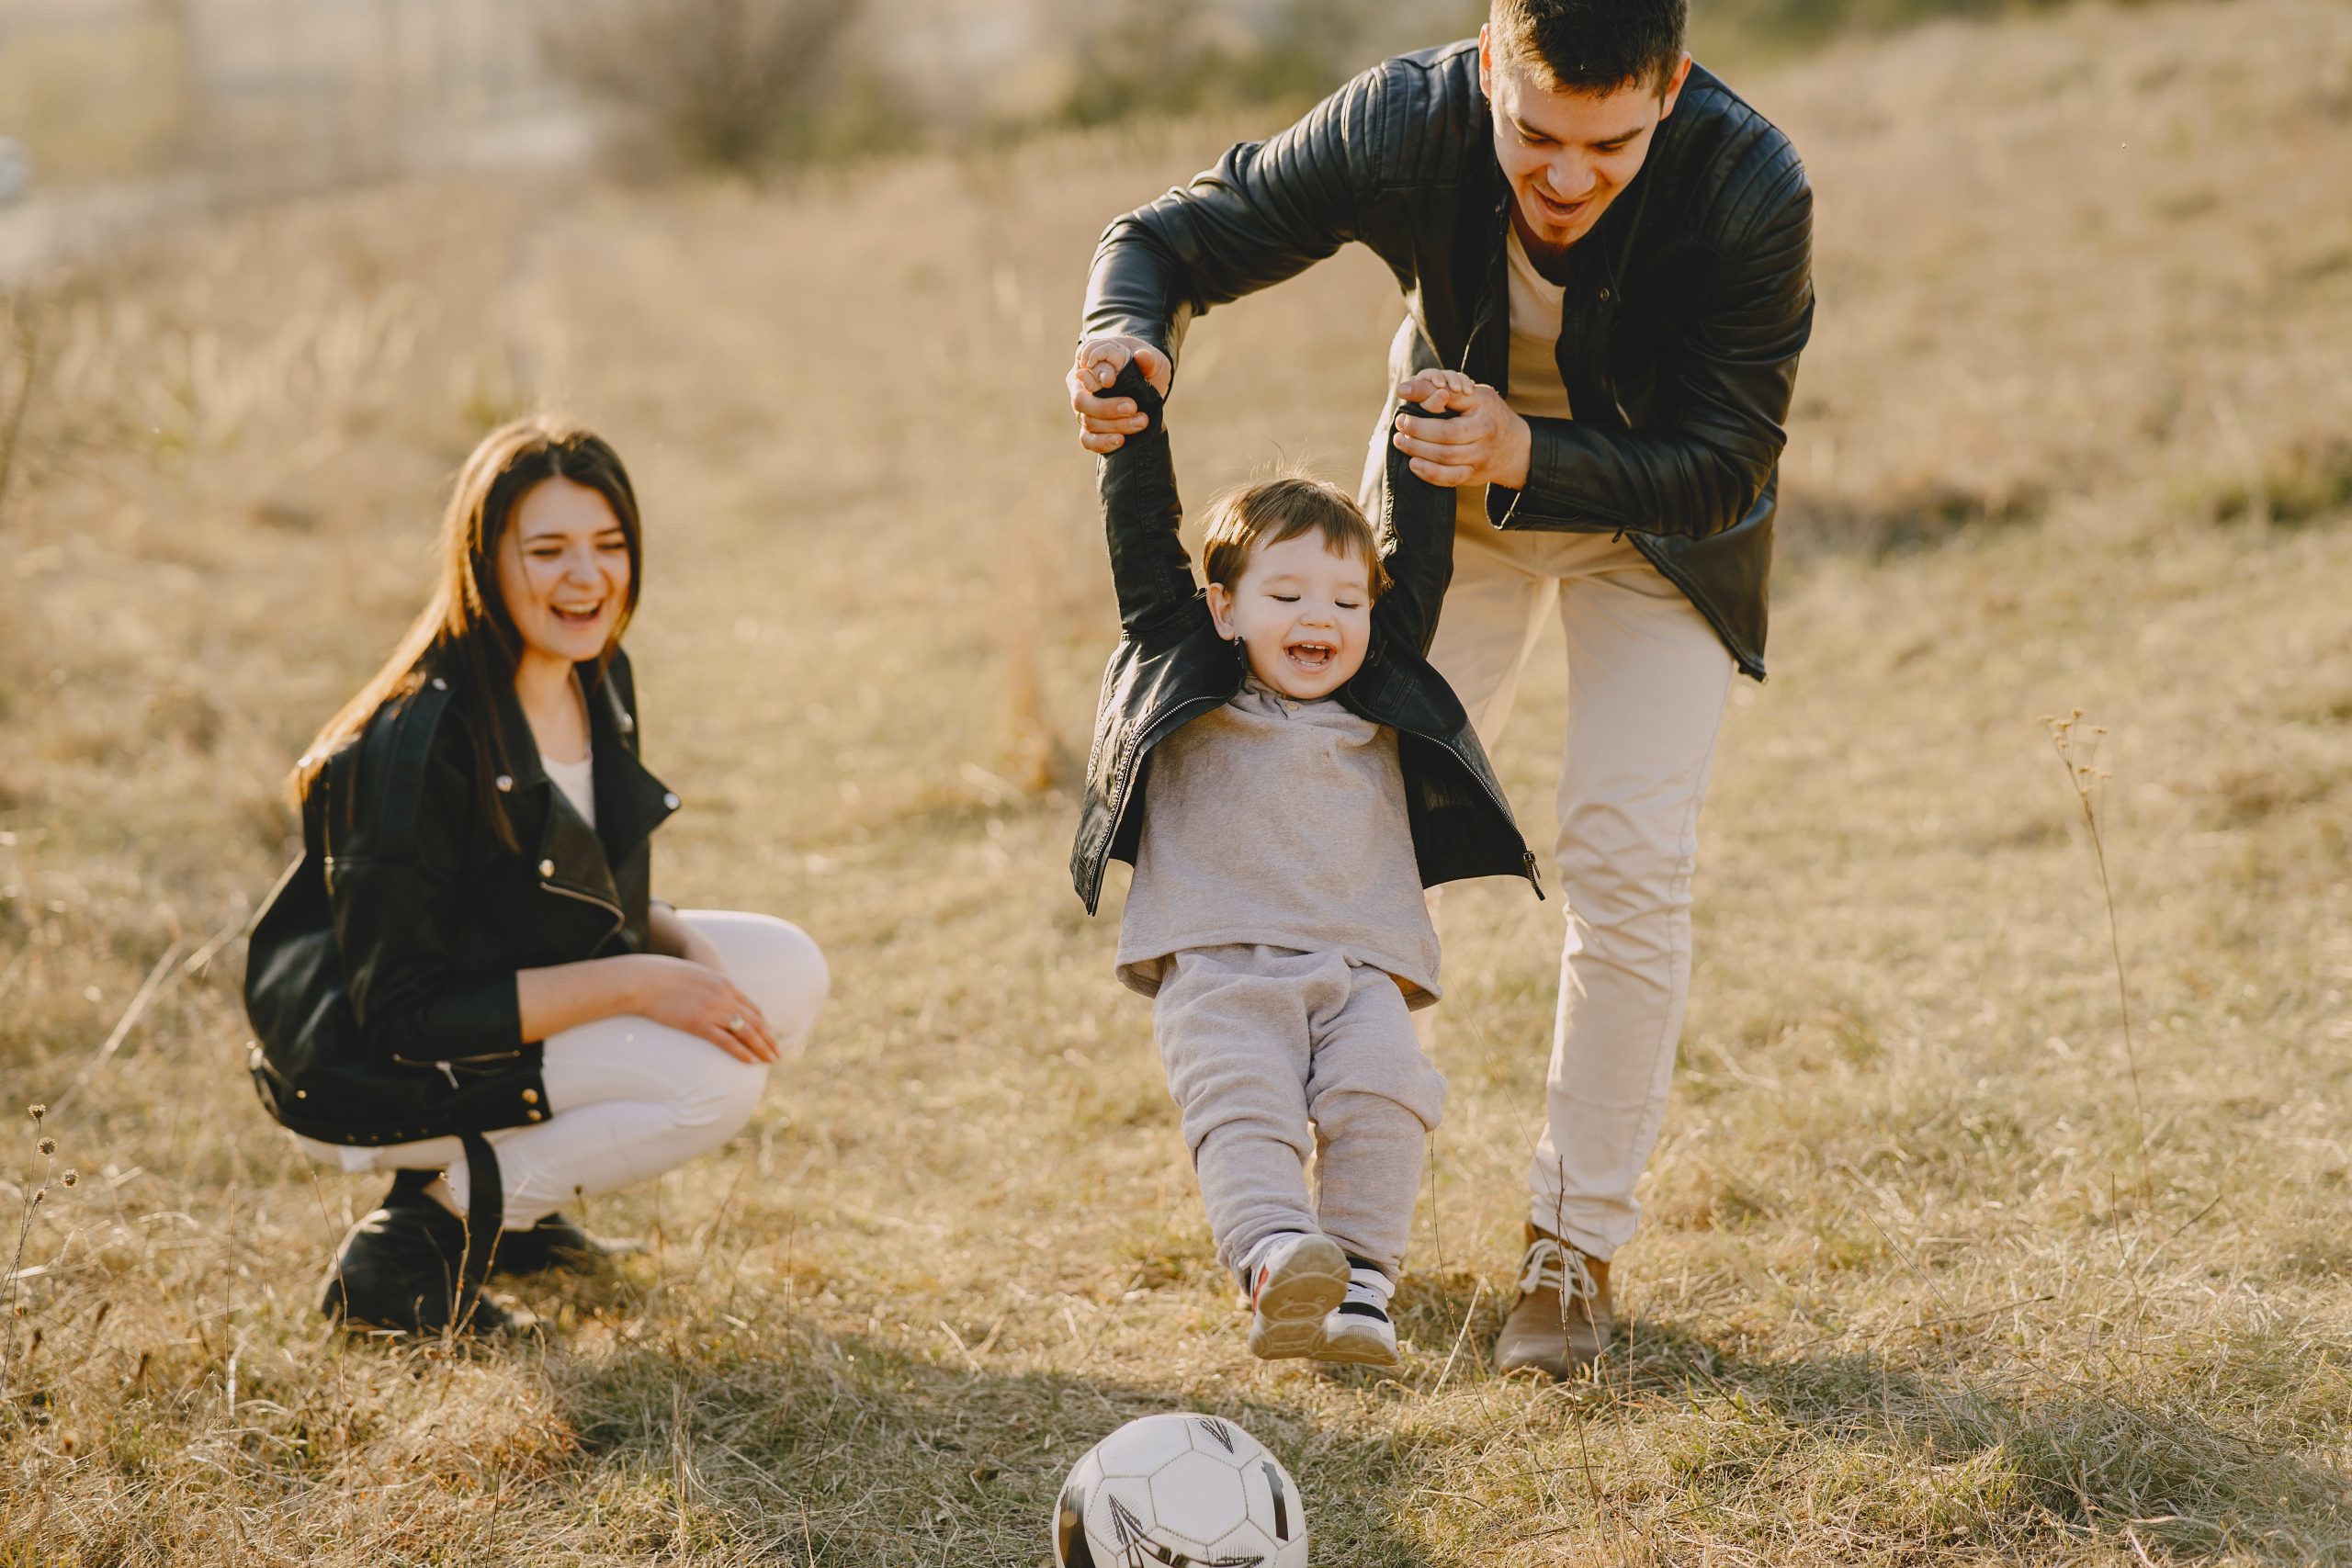 5 Ideas for Spending Quality Family Time